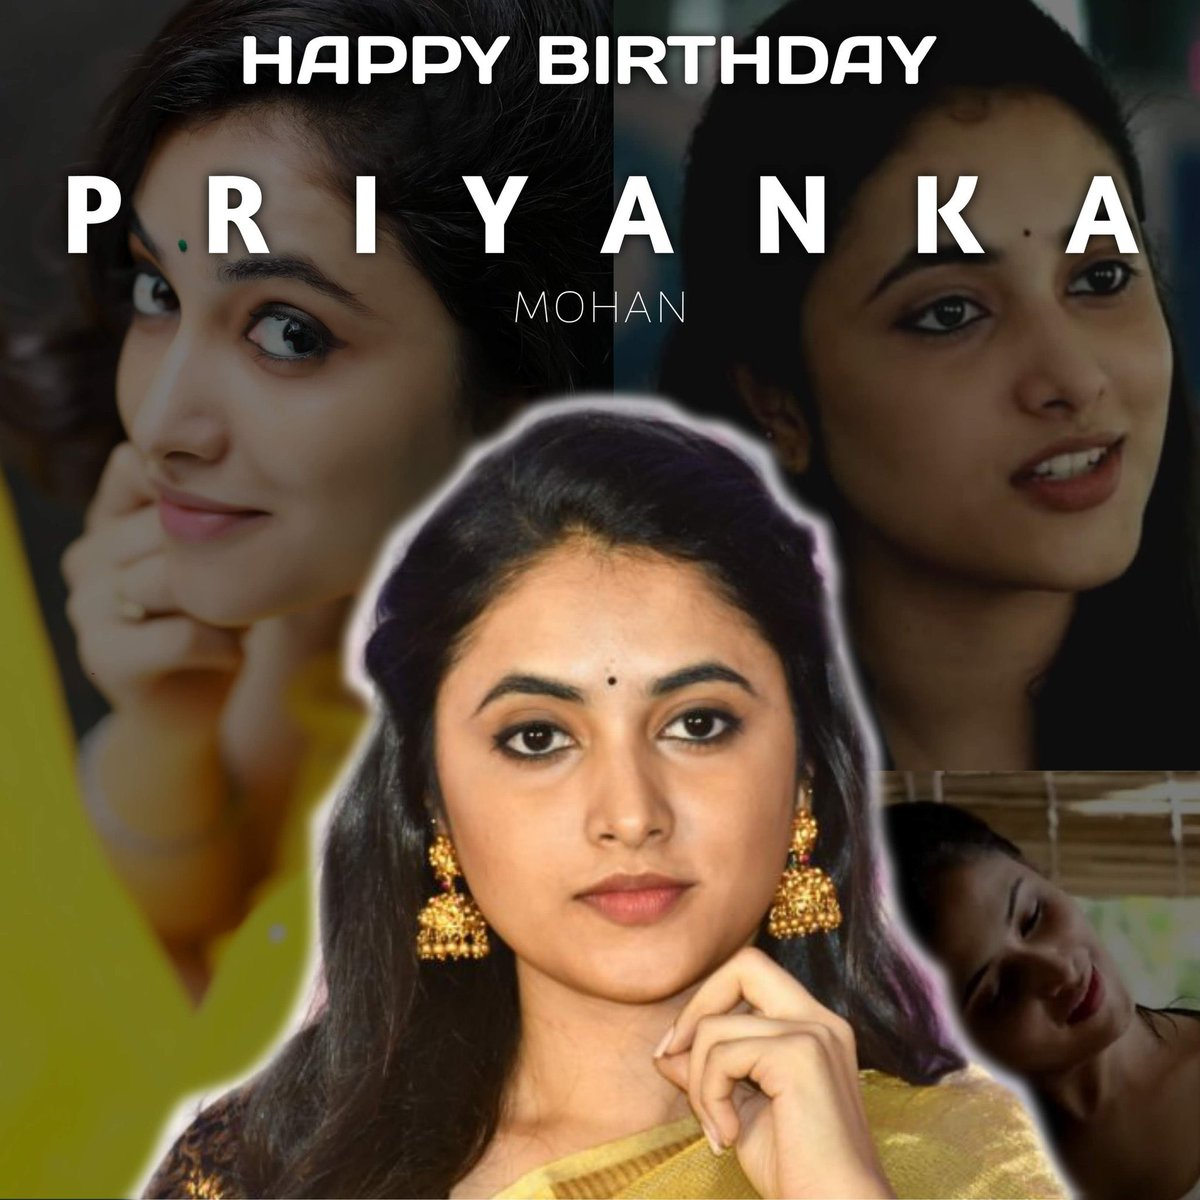 Happy Birthday Queen .@priyankaamohan 🤗❤️😍🎂🥳🎉🎉🥳🎂🥳🍫🍫🍫

Wishing you all success for your upcoming projects ma'am!

#RetouchFactory 
#Priyanka #PAM 
#PriyankaArulMohan 
#HBDPriyankaMohan #HappyBirthdayPriyankaMohan